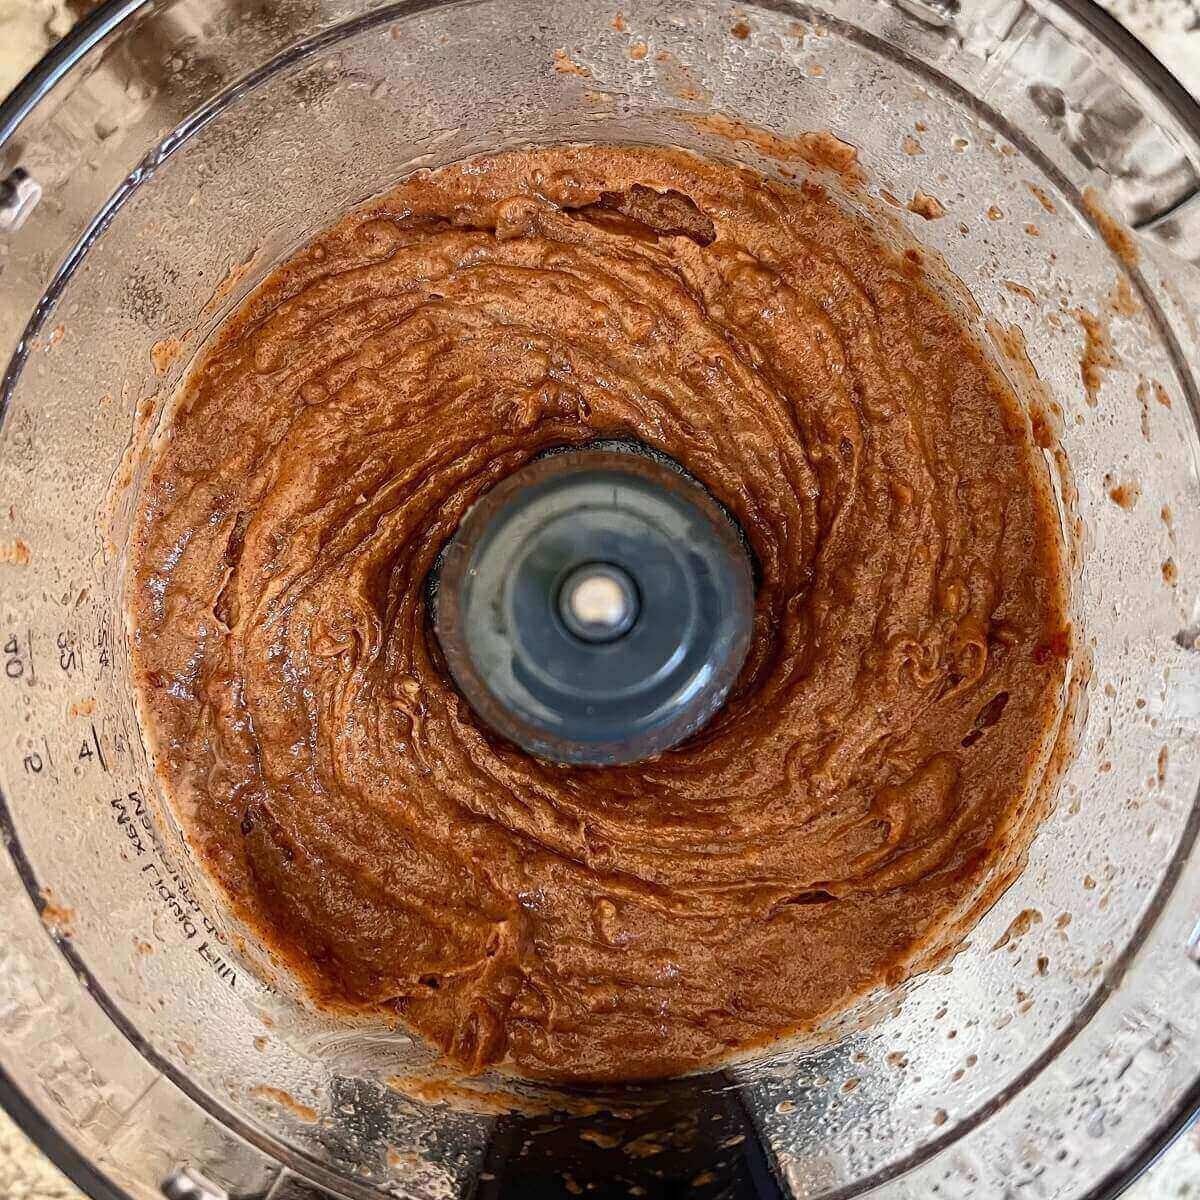 A thick, brown, blended mixture in a food processor.